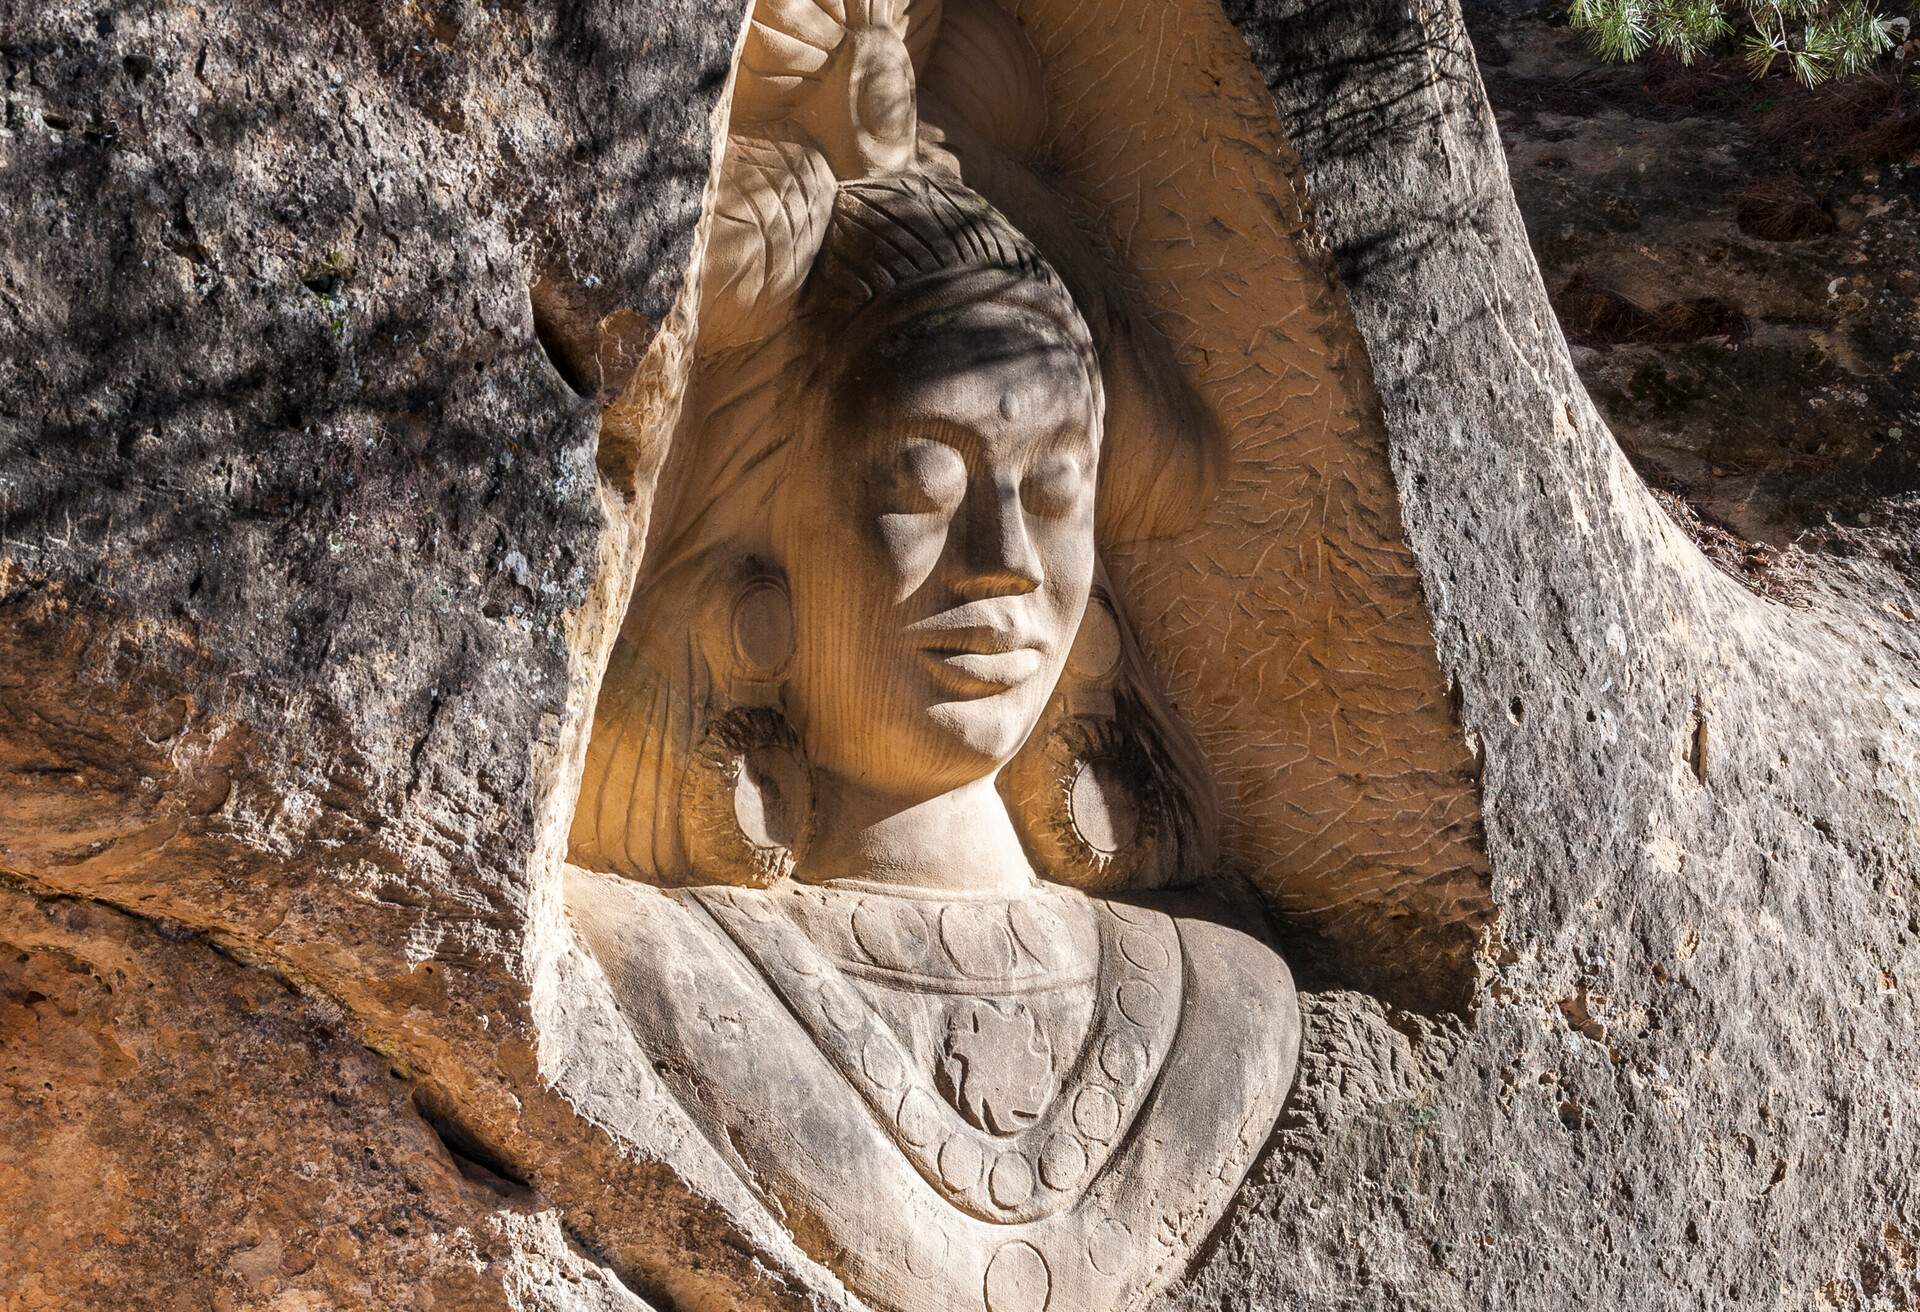 Sculptures carved on sandstones in the Ruta de las Caras, Route of the Faces, a hiking route at the shore of Buendia Reservoir, Cuenca, Spain.